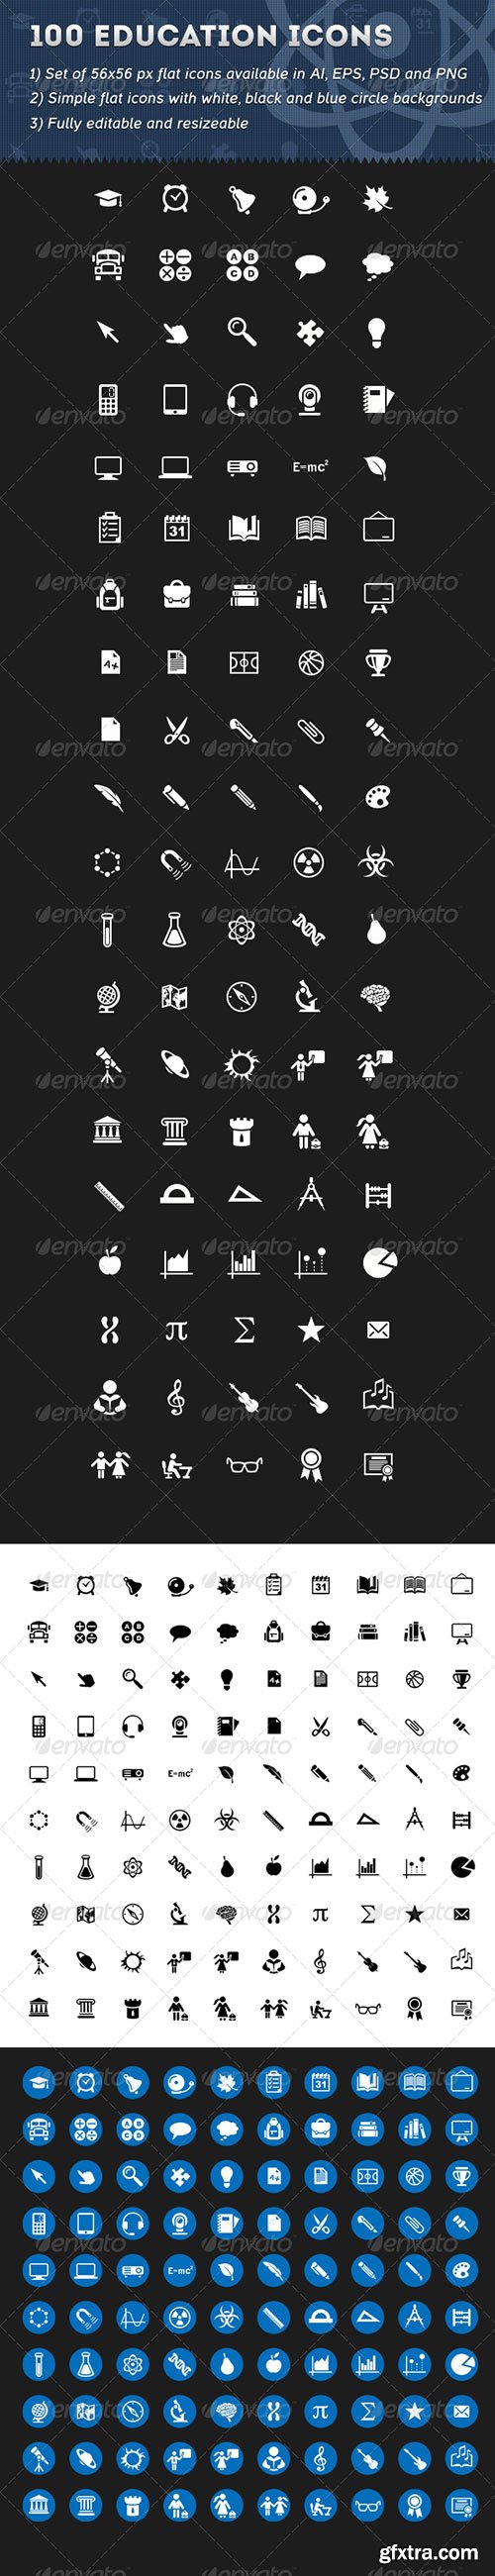 GraphicRiver - 100 Education Icons 5489707